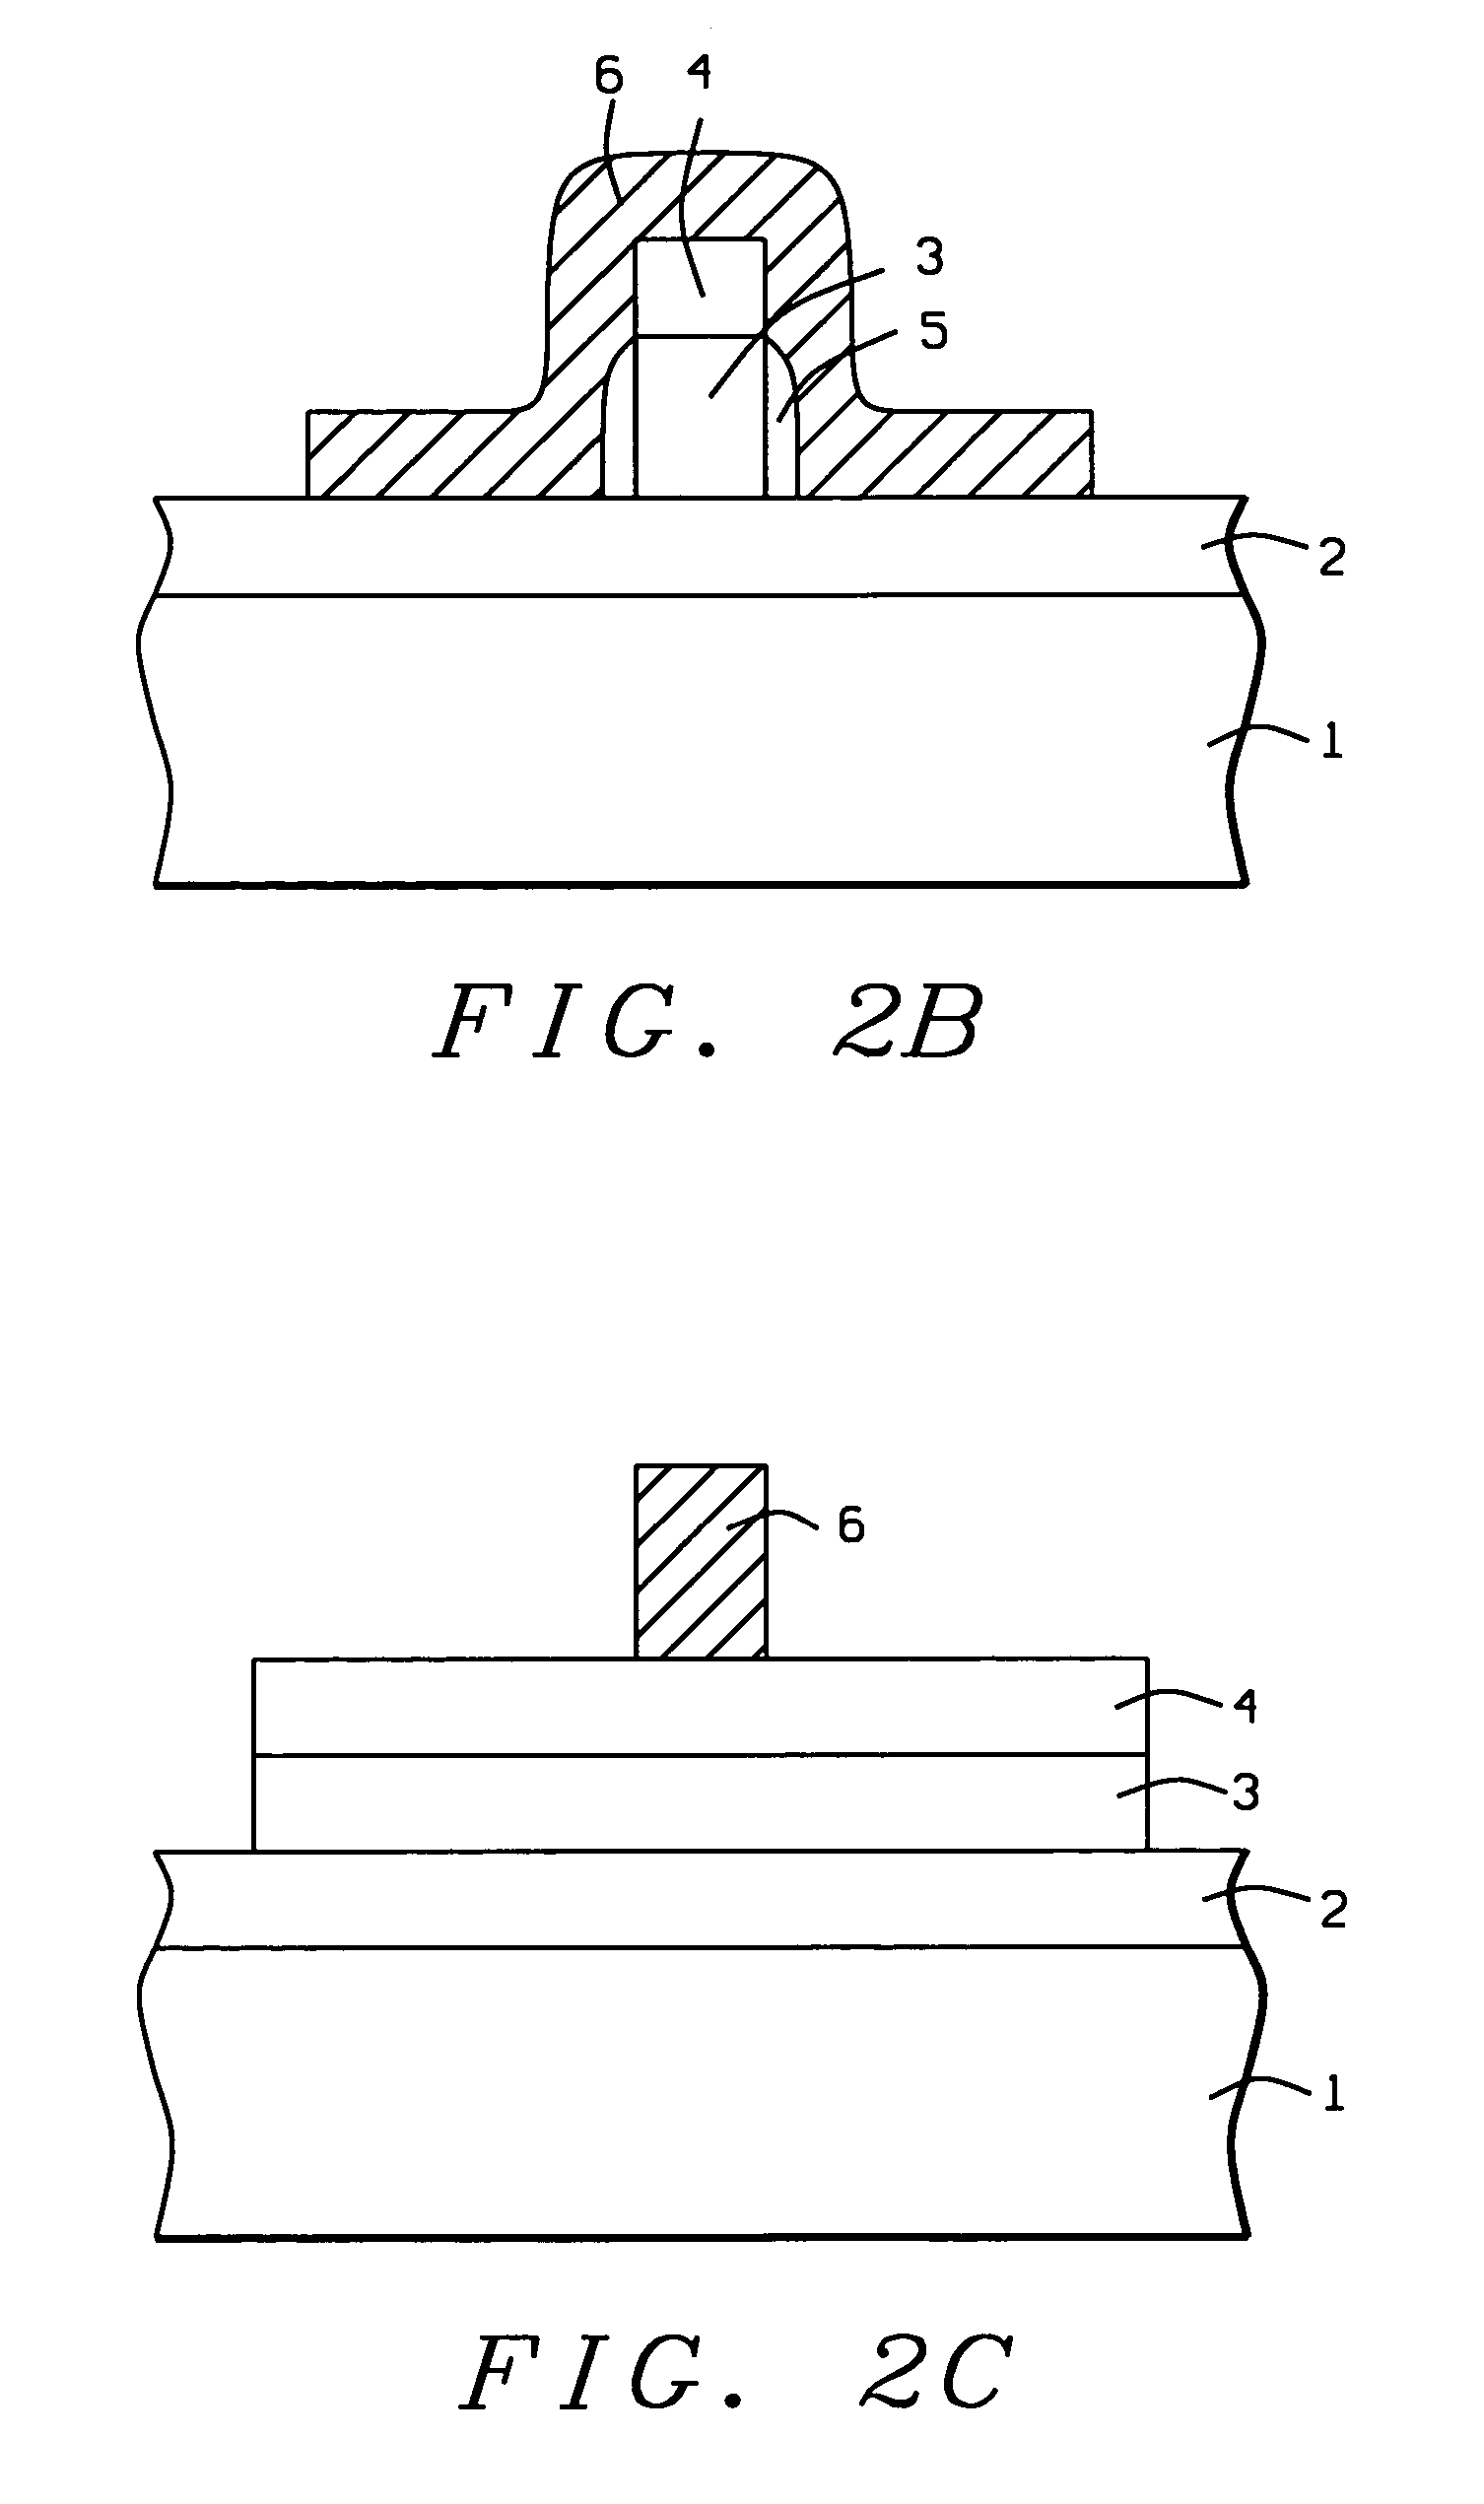 Method of fabricating a necked finfet device